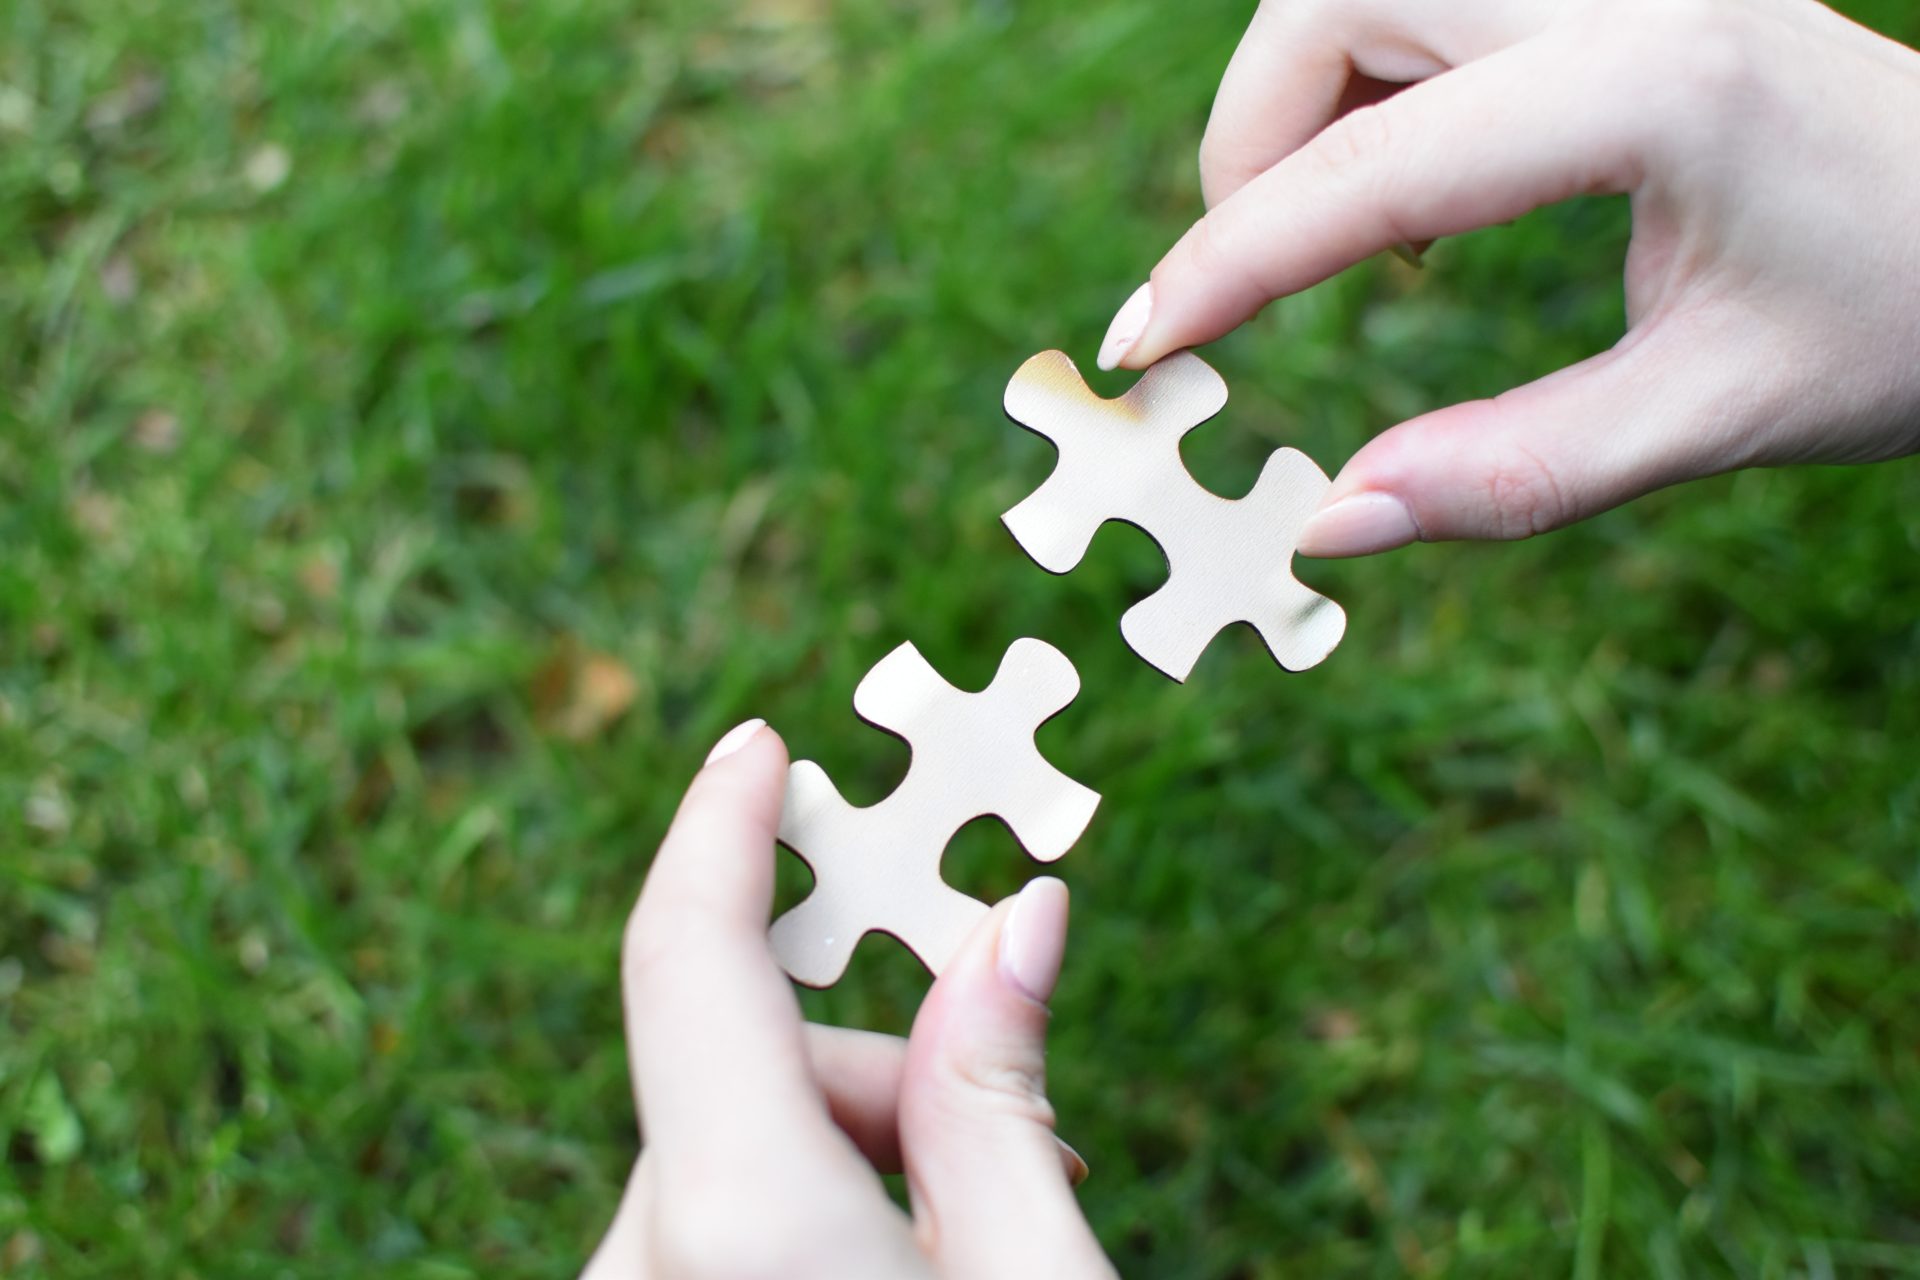 Two jigsaw pieces being held close together over green grass